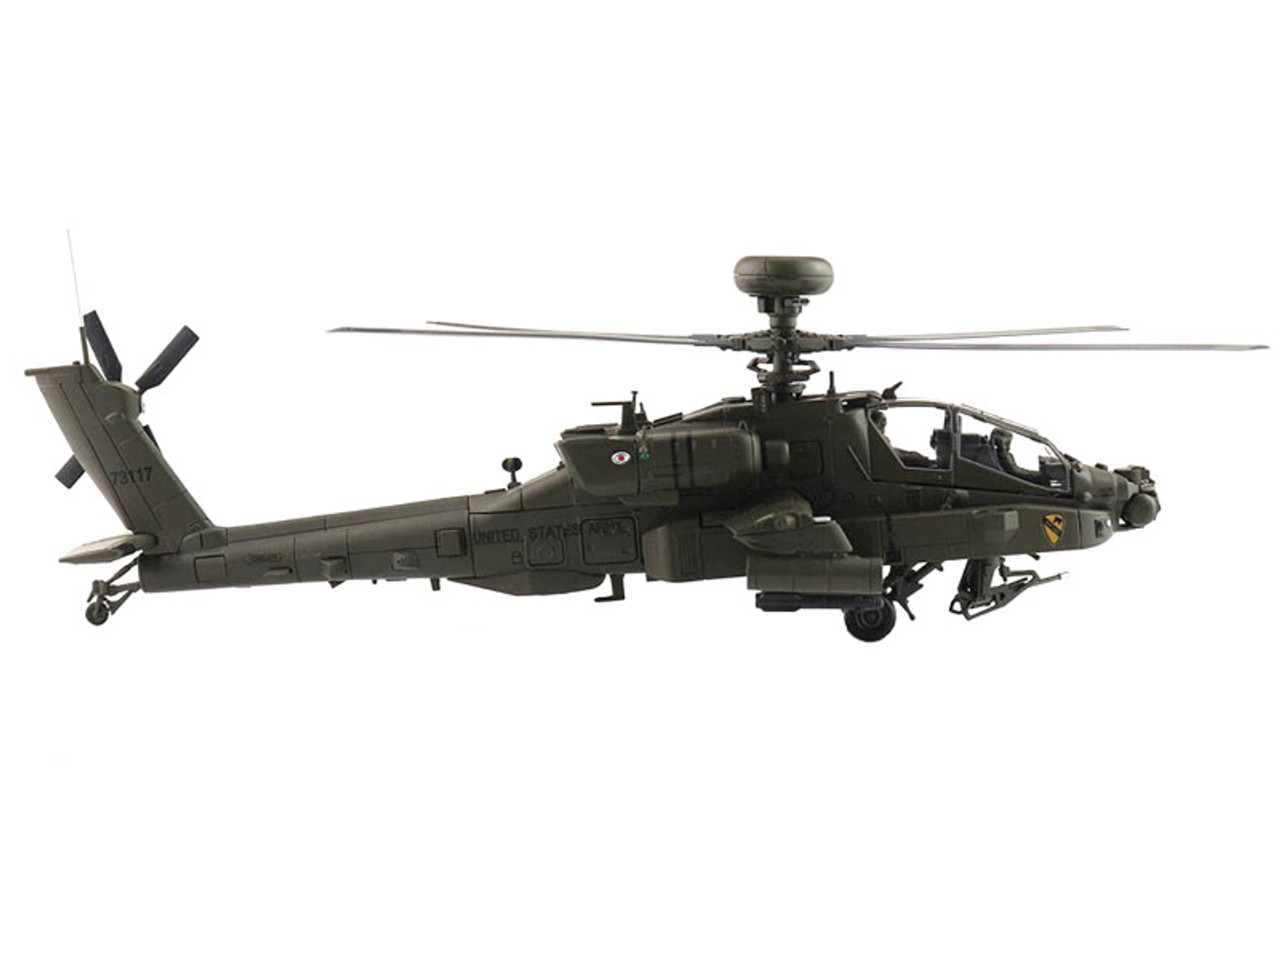 Boeing AH-64E Apache Guardian Attack Helicopter "1st Air Cavalry United States Army" (2018) "Air Power Series" 1/72 Diecast Model by Hobby Master